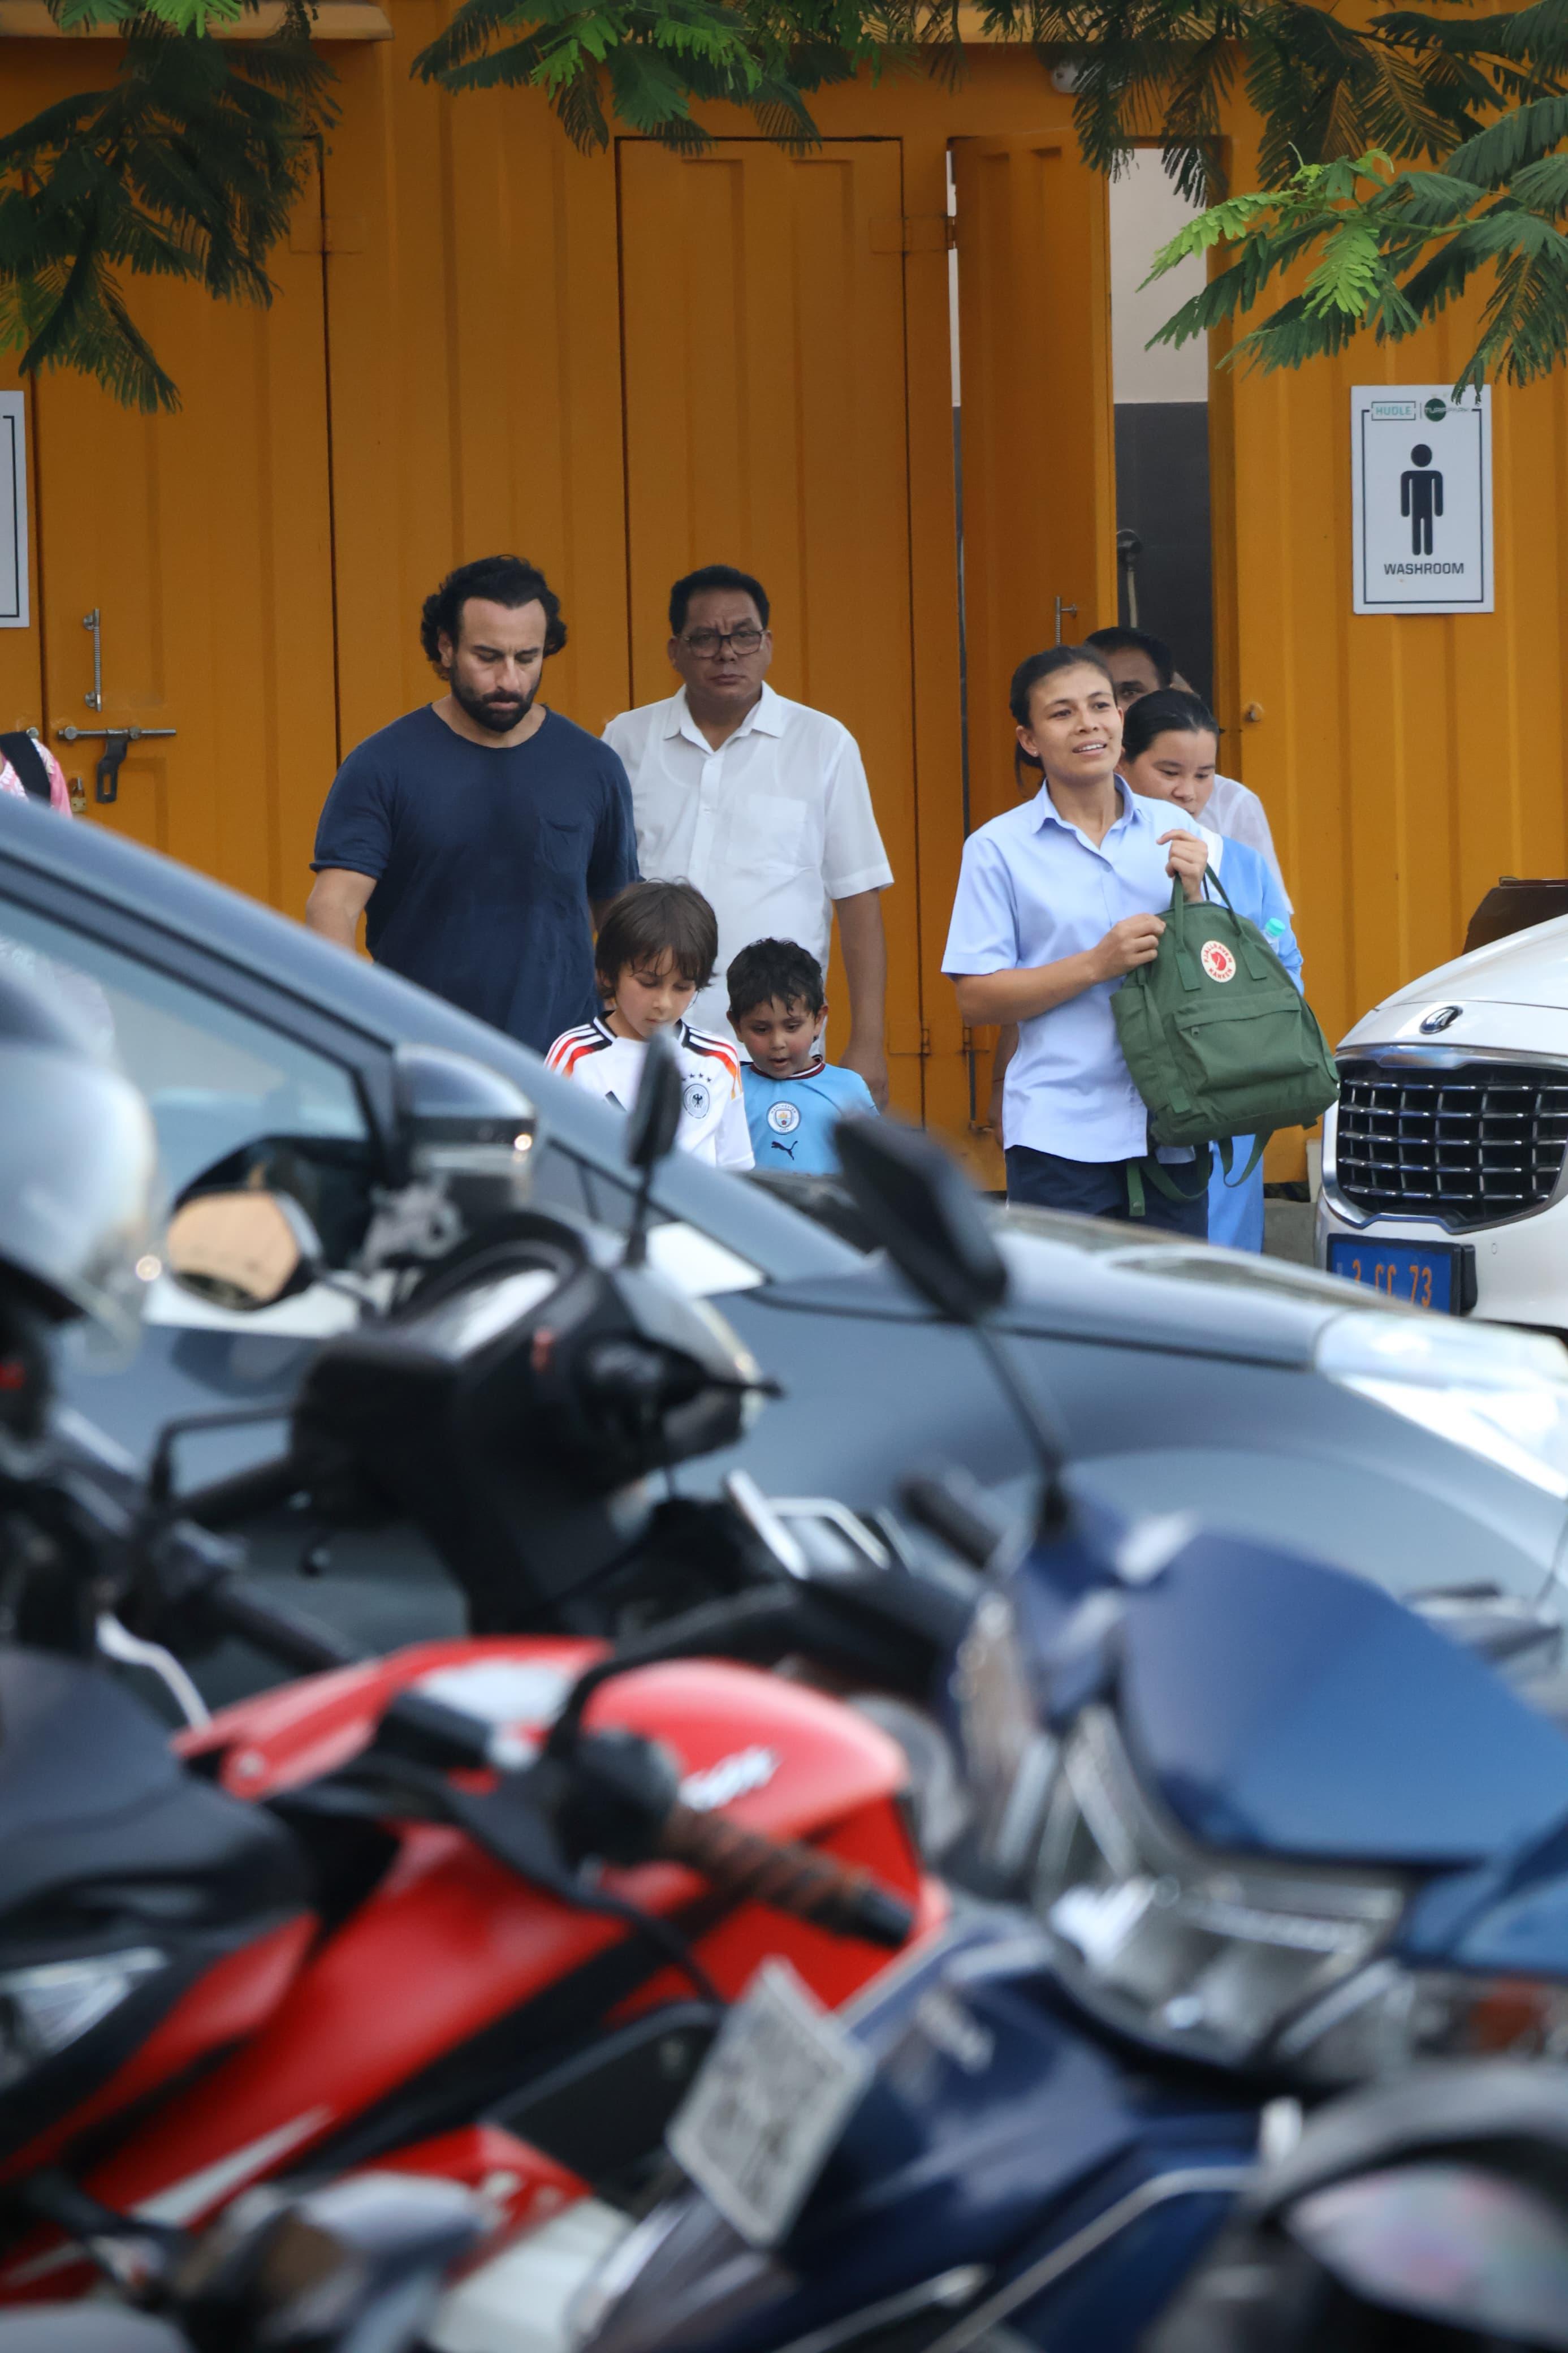 Saif Ali Khan was clicked with his sons Taimur and Jeh Ali Khan